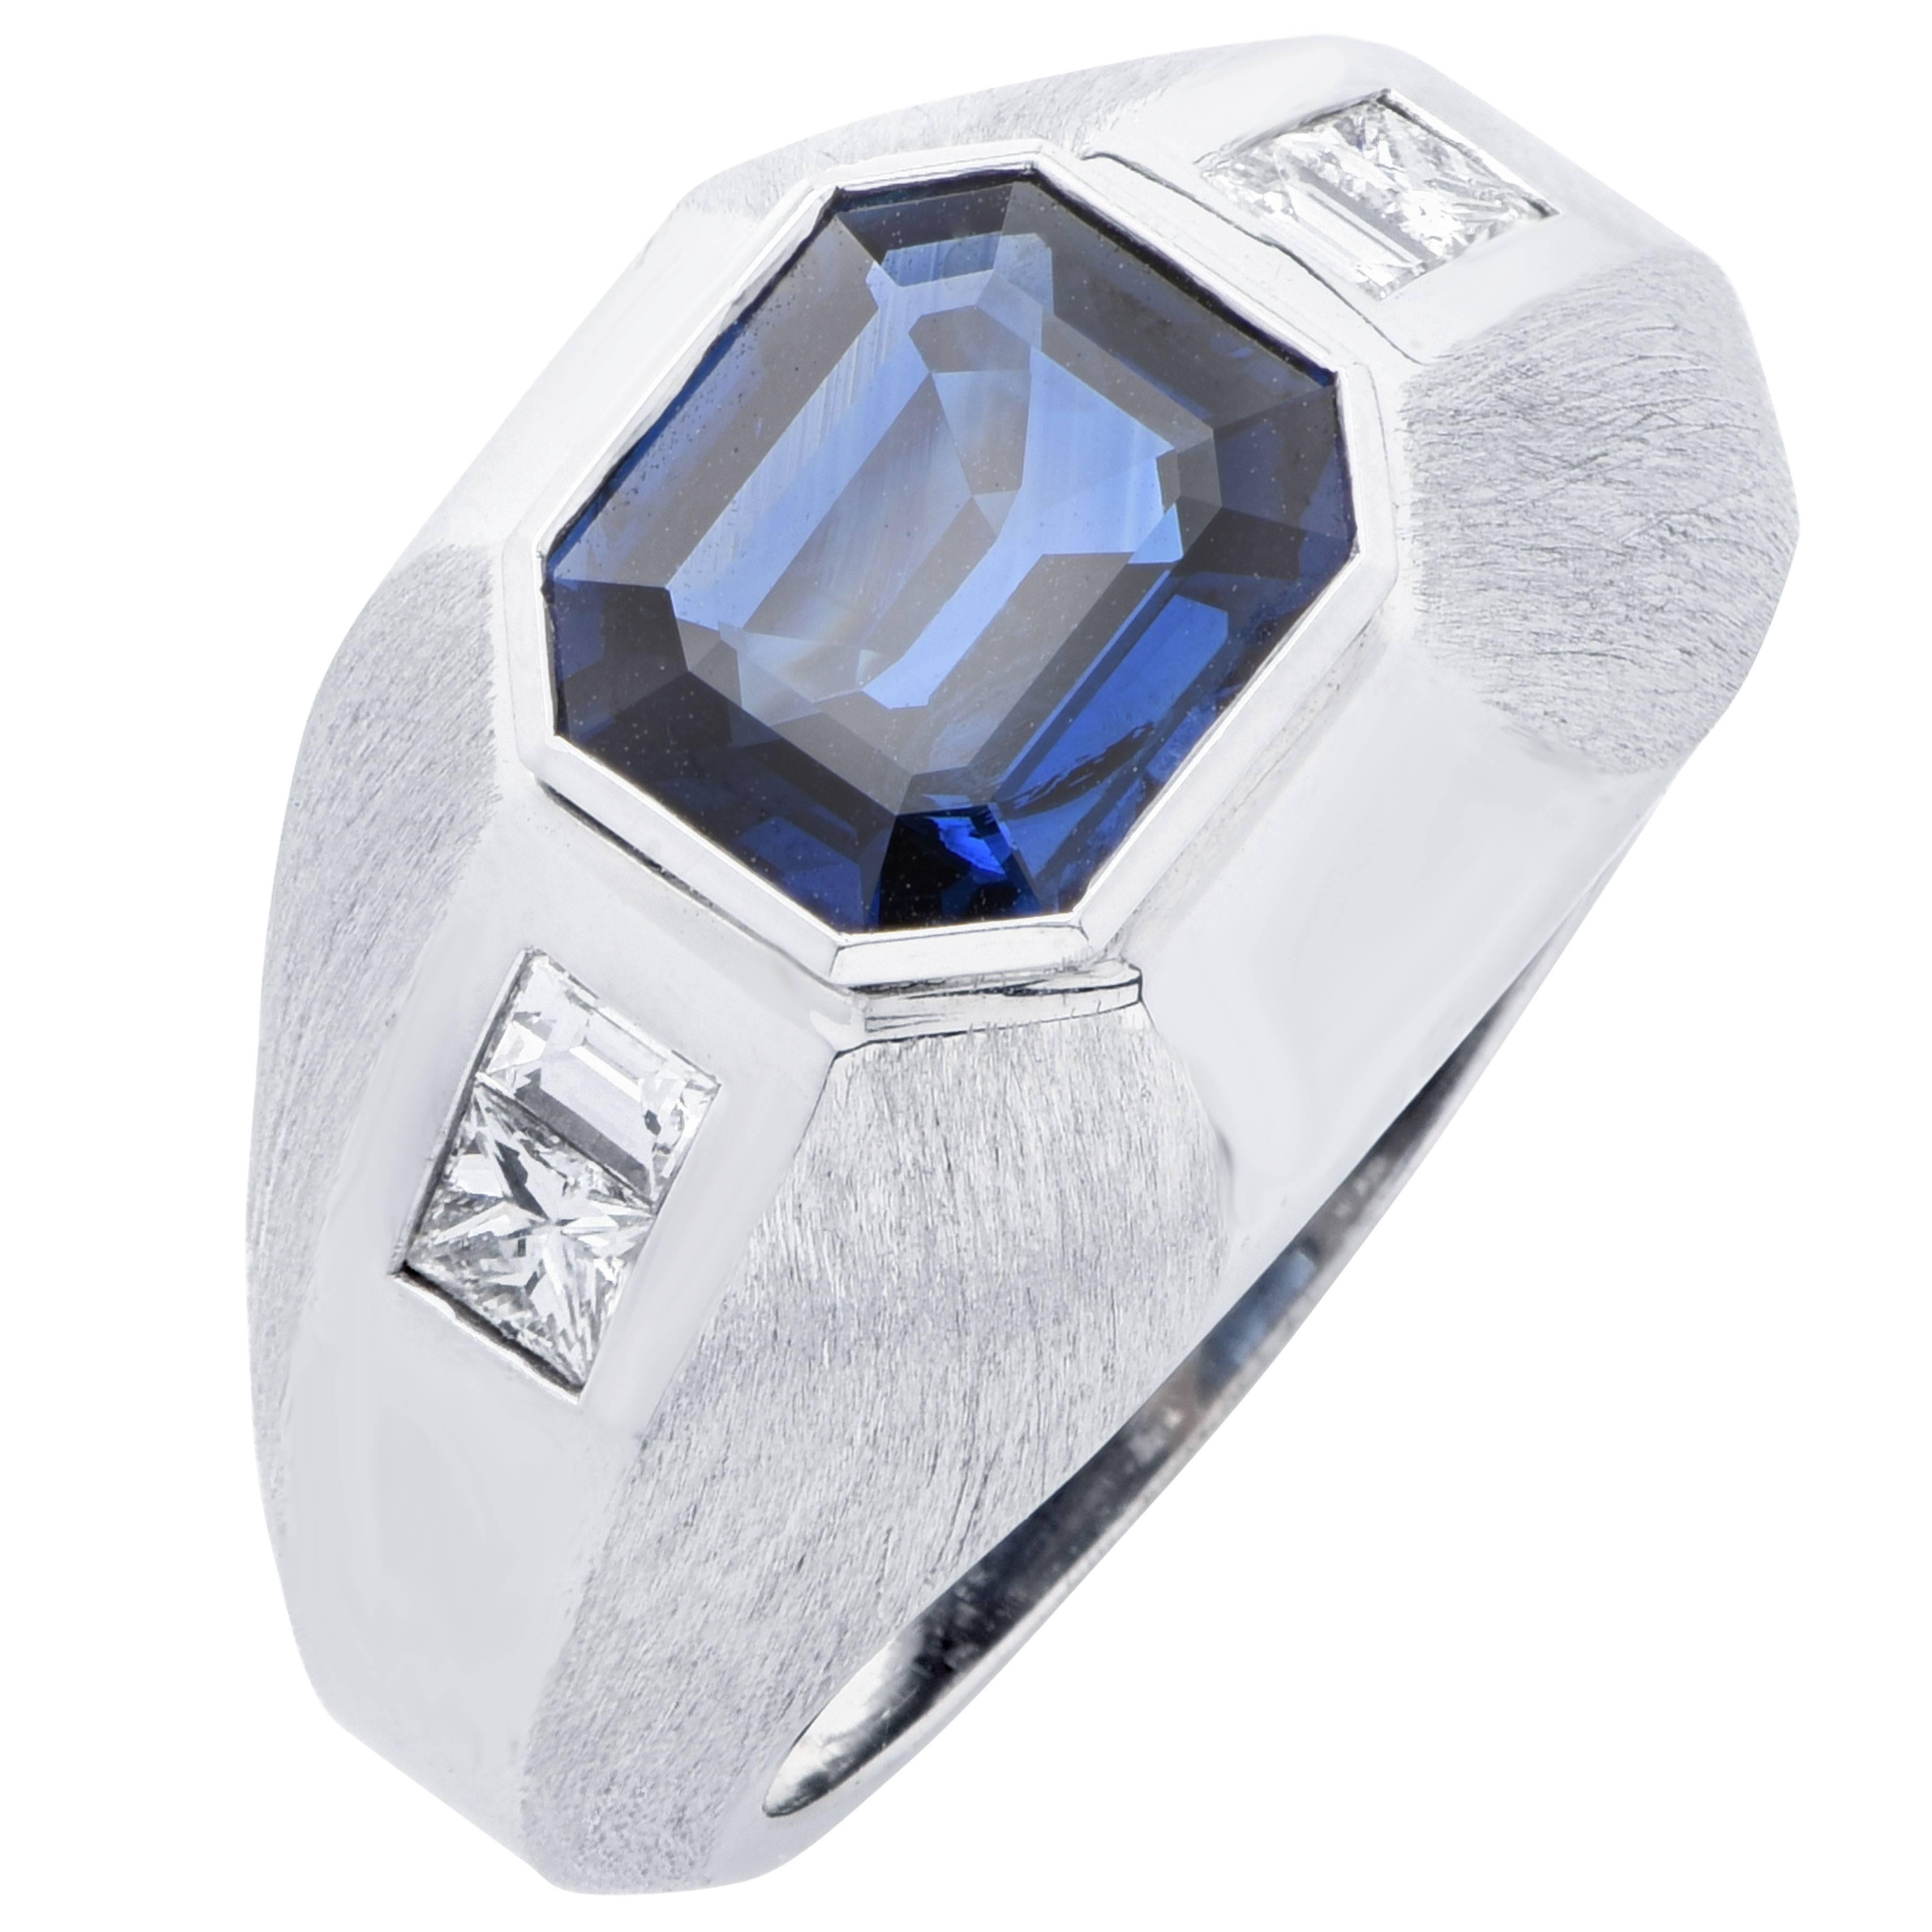 This men's ring features an emerald cut Sapphire weighing 3 carats and 4 mix cut diamonds which weigh 0.85 carats. This ring alternates in high polish and matte finish.  

Ring Size: 9 1/2 (Can be sized)
Metal: 18 Kt White Gold (stamped and/or